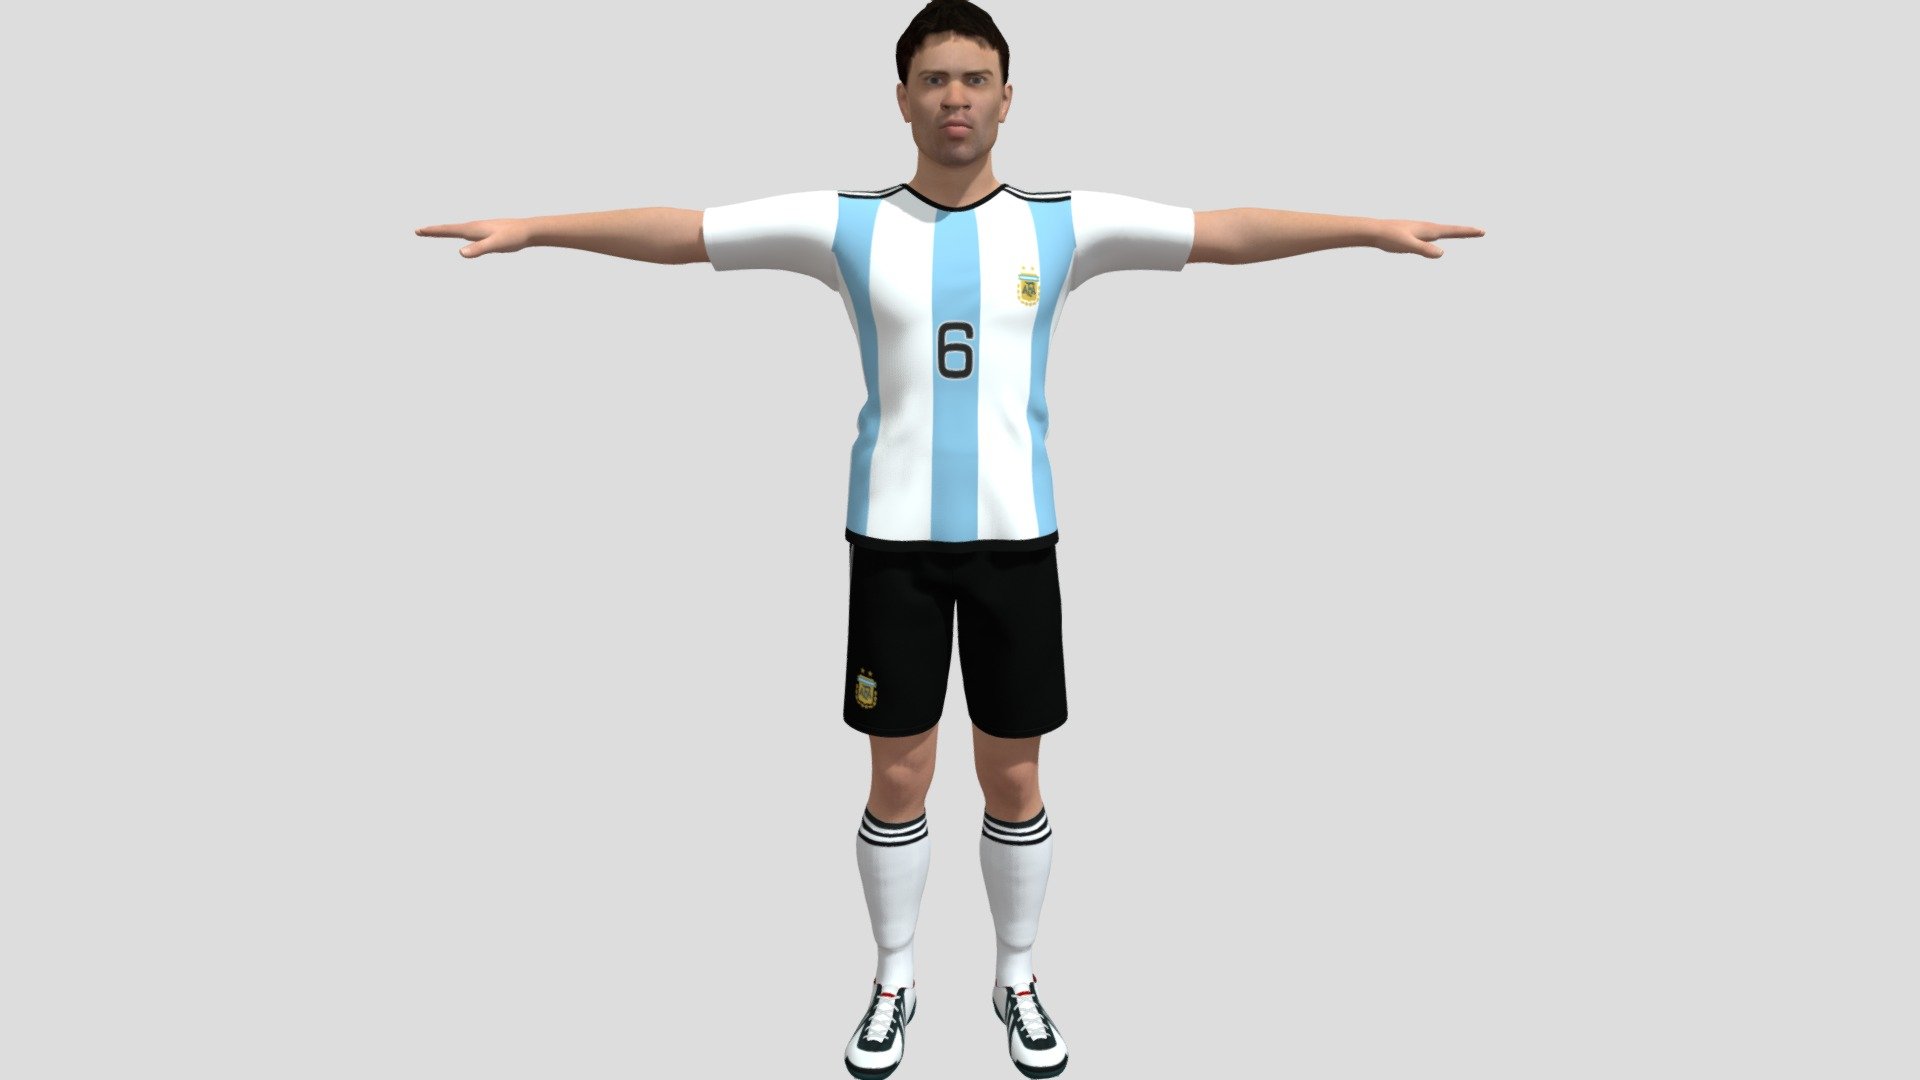 Soccer Player 3D model is a high quality, photo real model that will enhance detail and realism to any of your game projects or commercials. The model has a fully textured, detailed design that allows for close-up renders 3d model